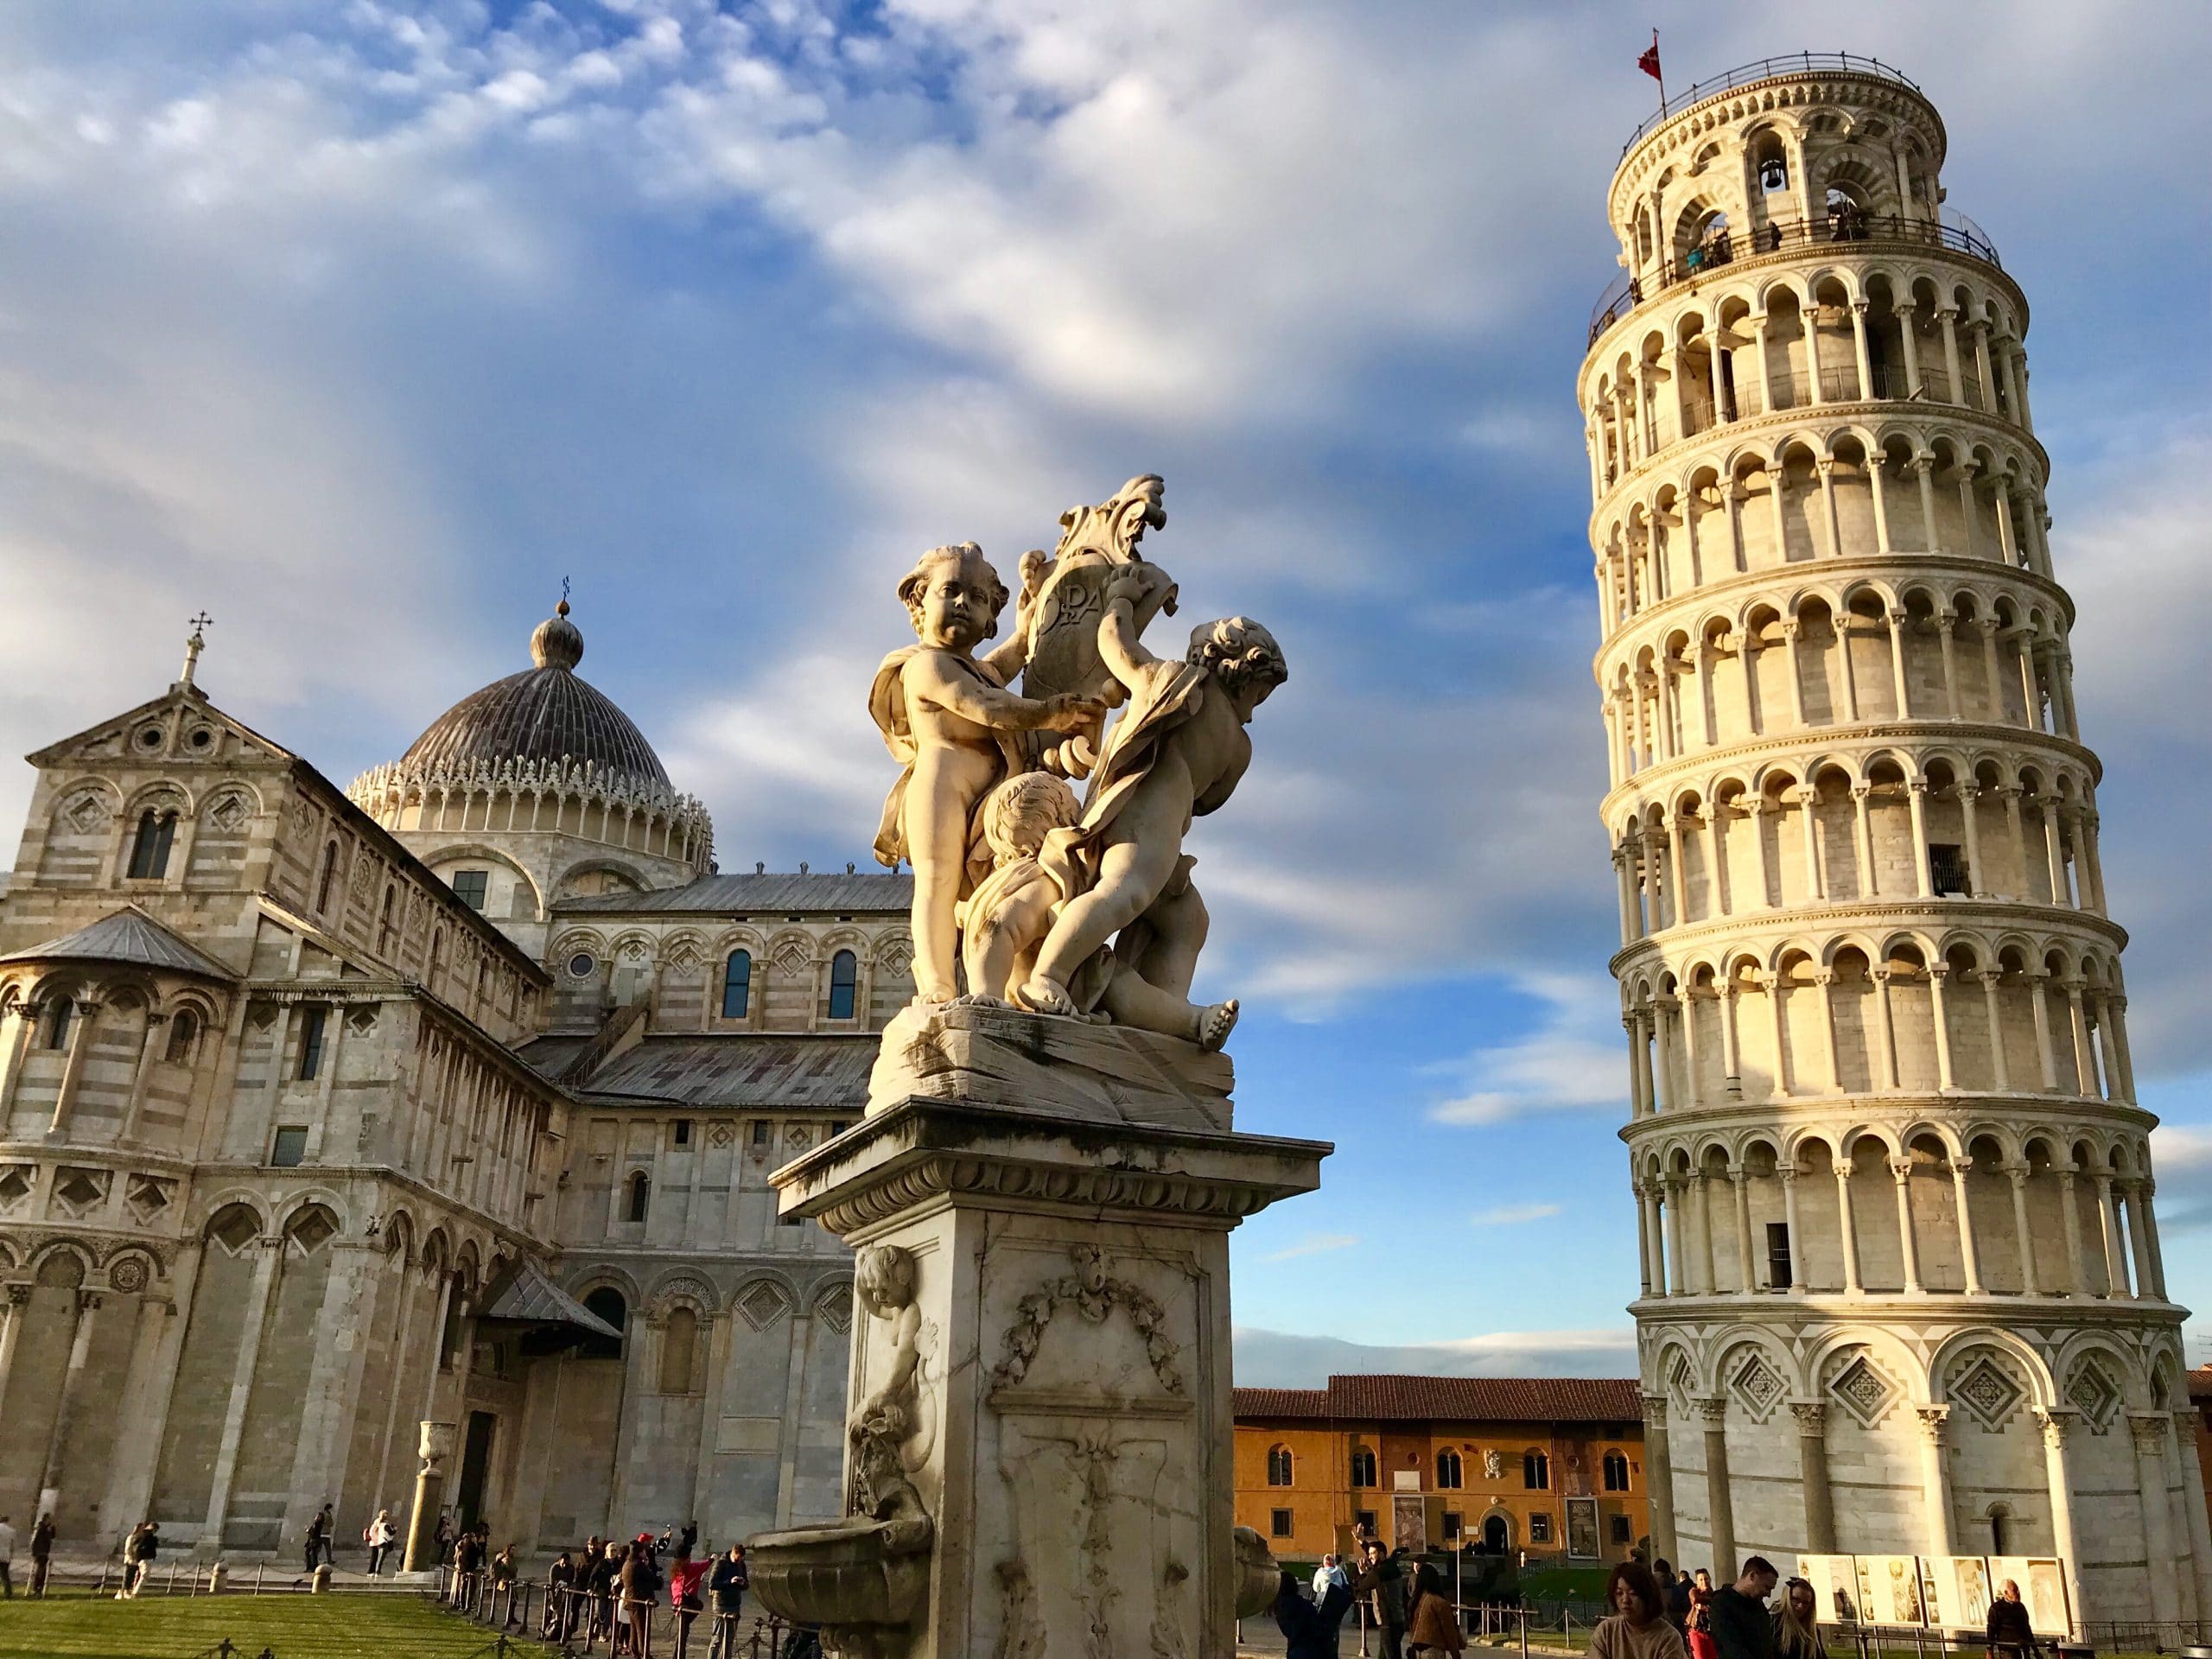 Yes We CAN – The Leaning Tower of Pisa